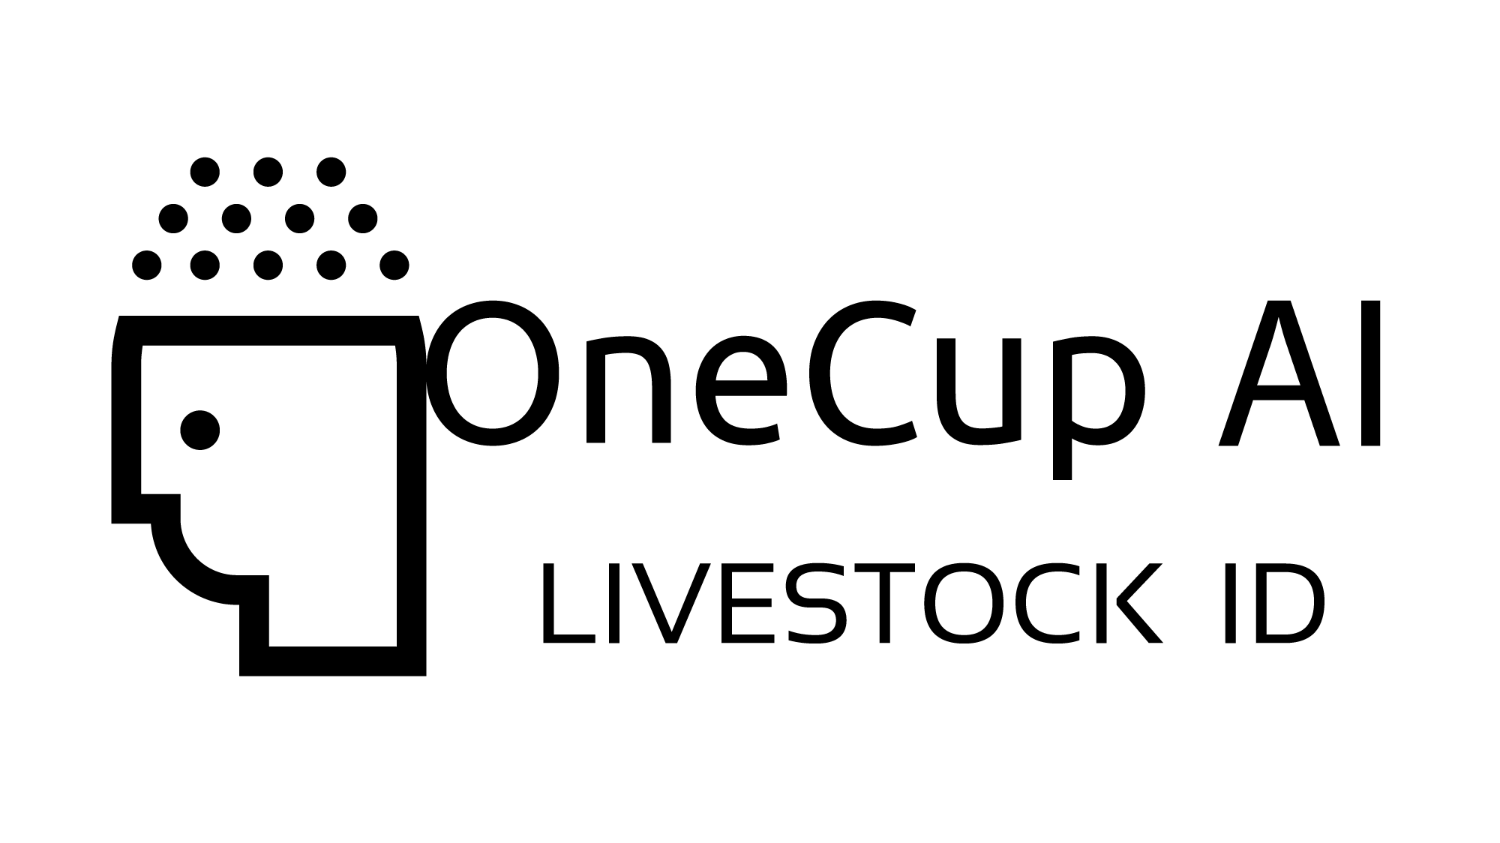 OneCup AI